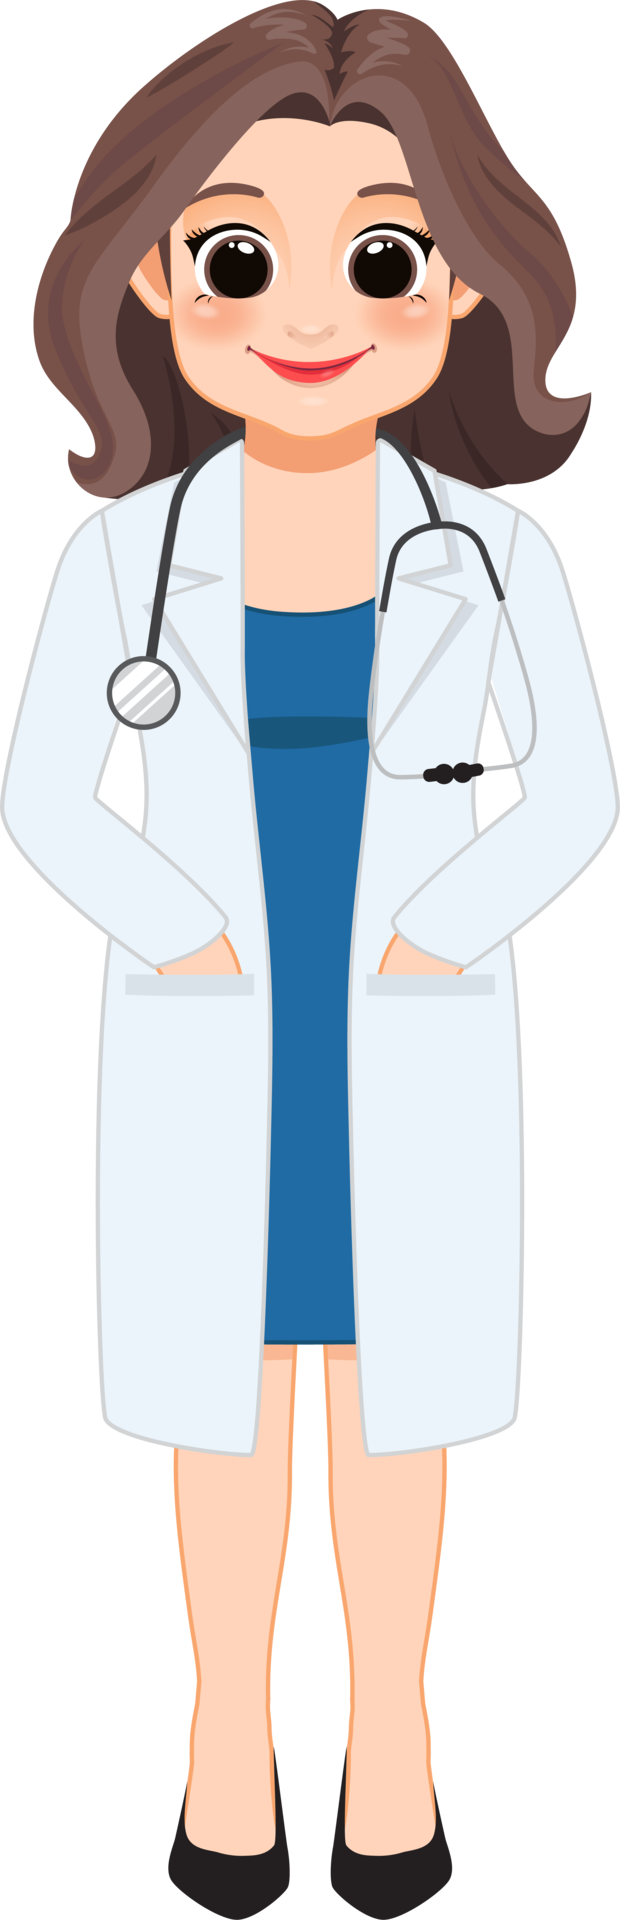 Female Doctor In Uniform Clipart Professional Medical Workers